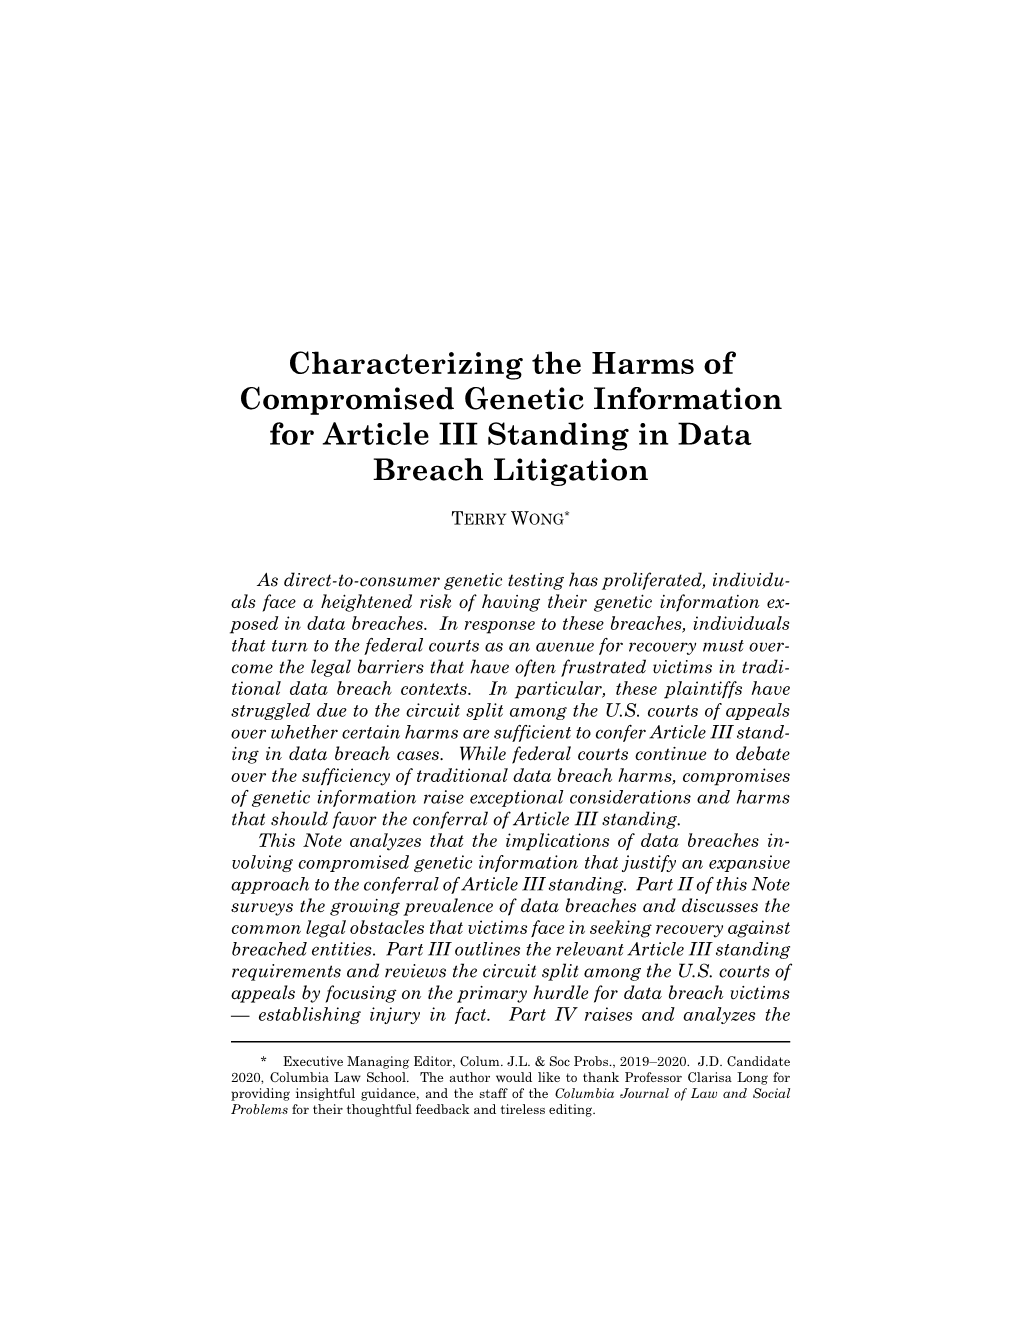 Characterizing the Harms of Compromised Genetic Information for Article III Standing in Data Breach Litigation